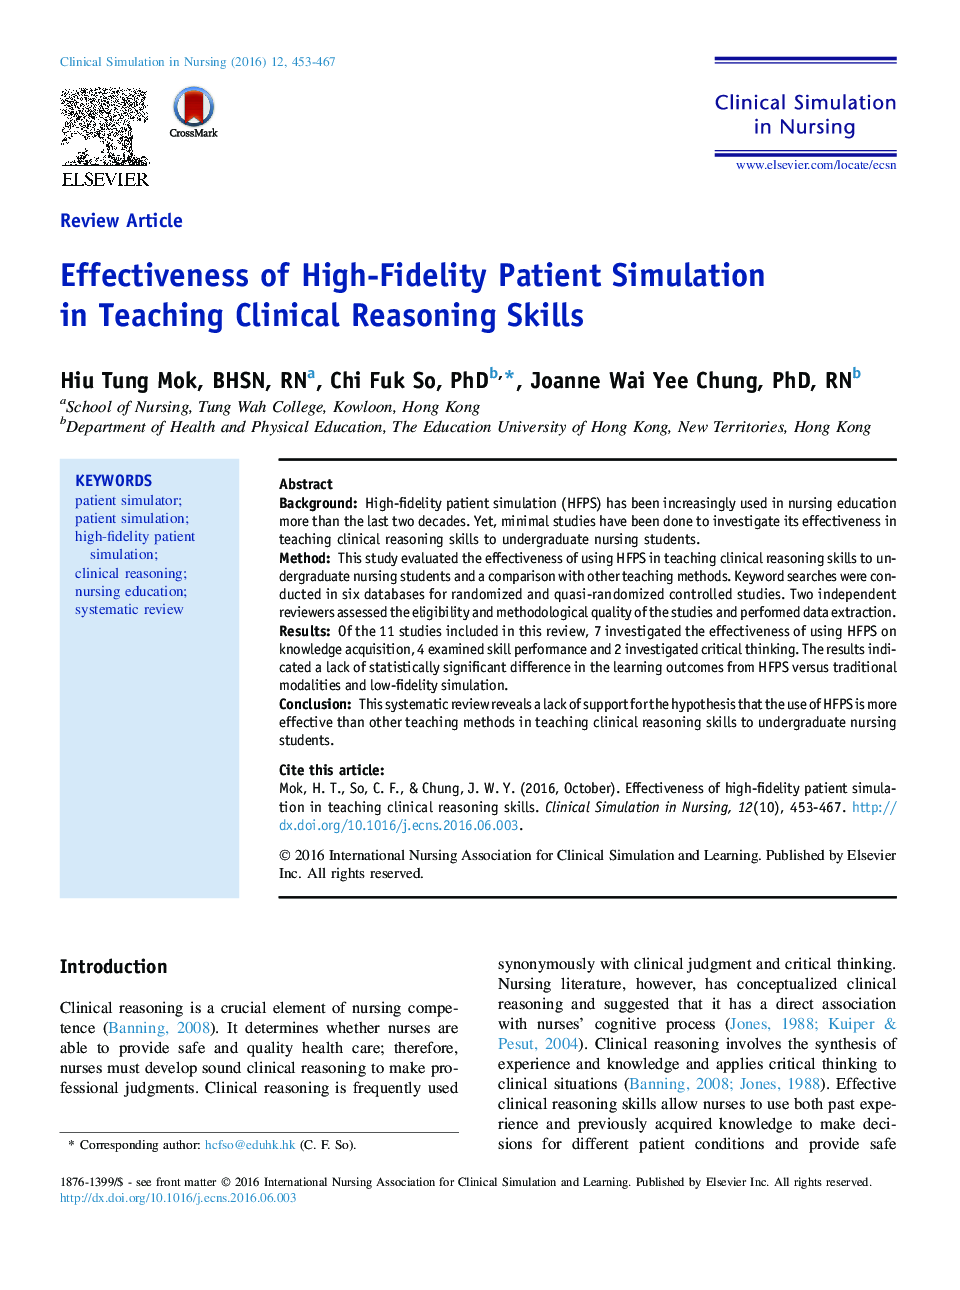 Effectiveness of High-Fidelity Patient Simulation in Teaching Clinical Reasoning Skills